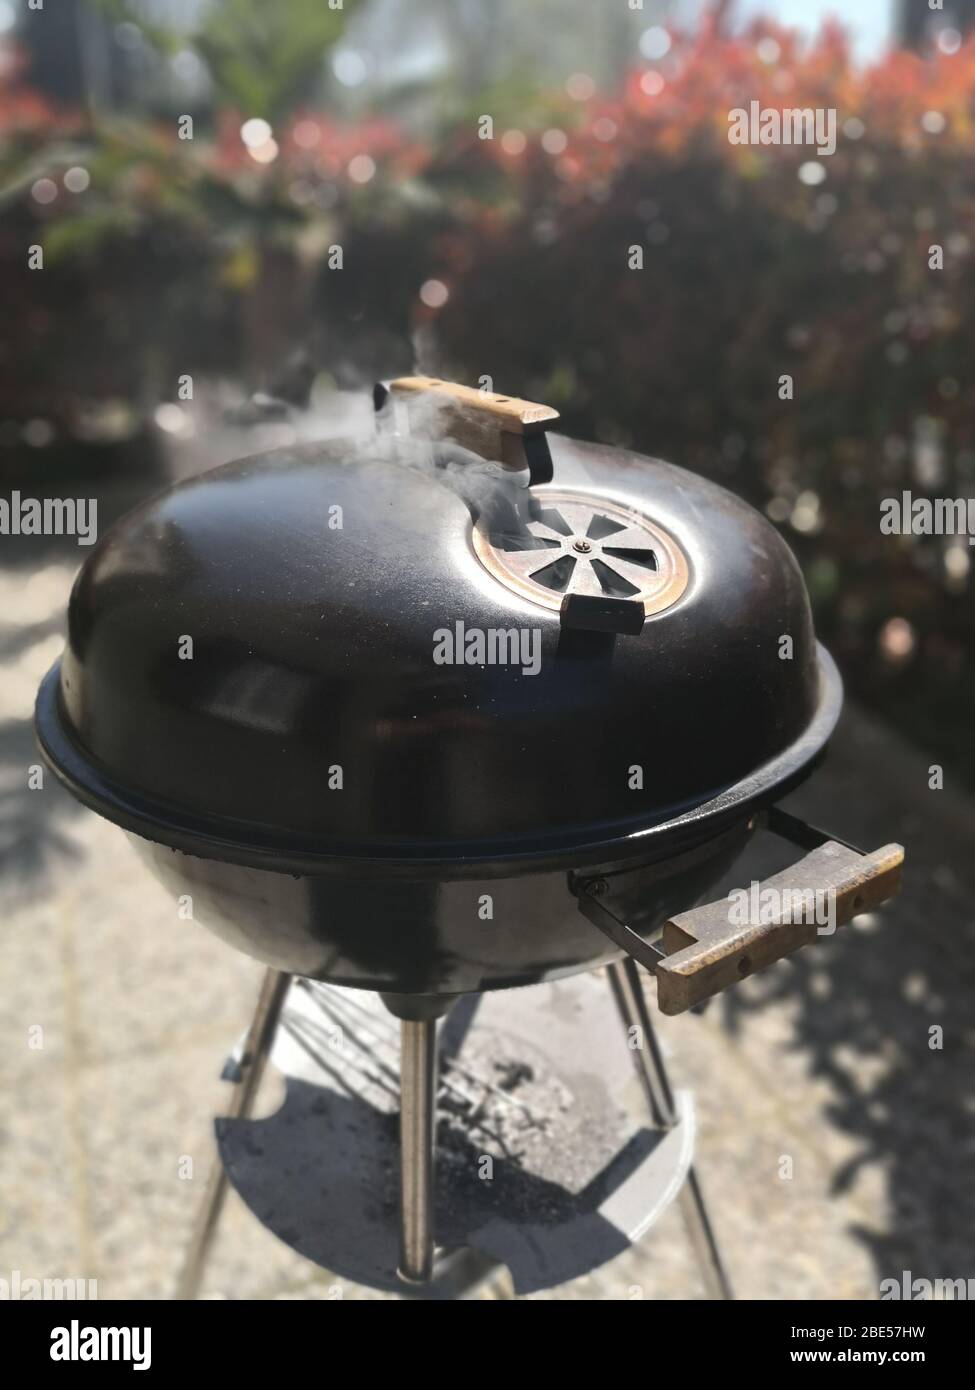 A barbeque in action Stock Photo